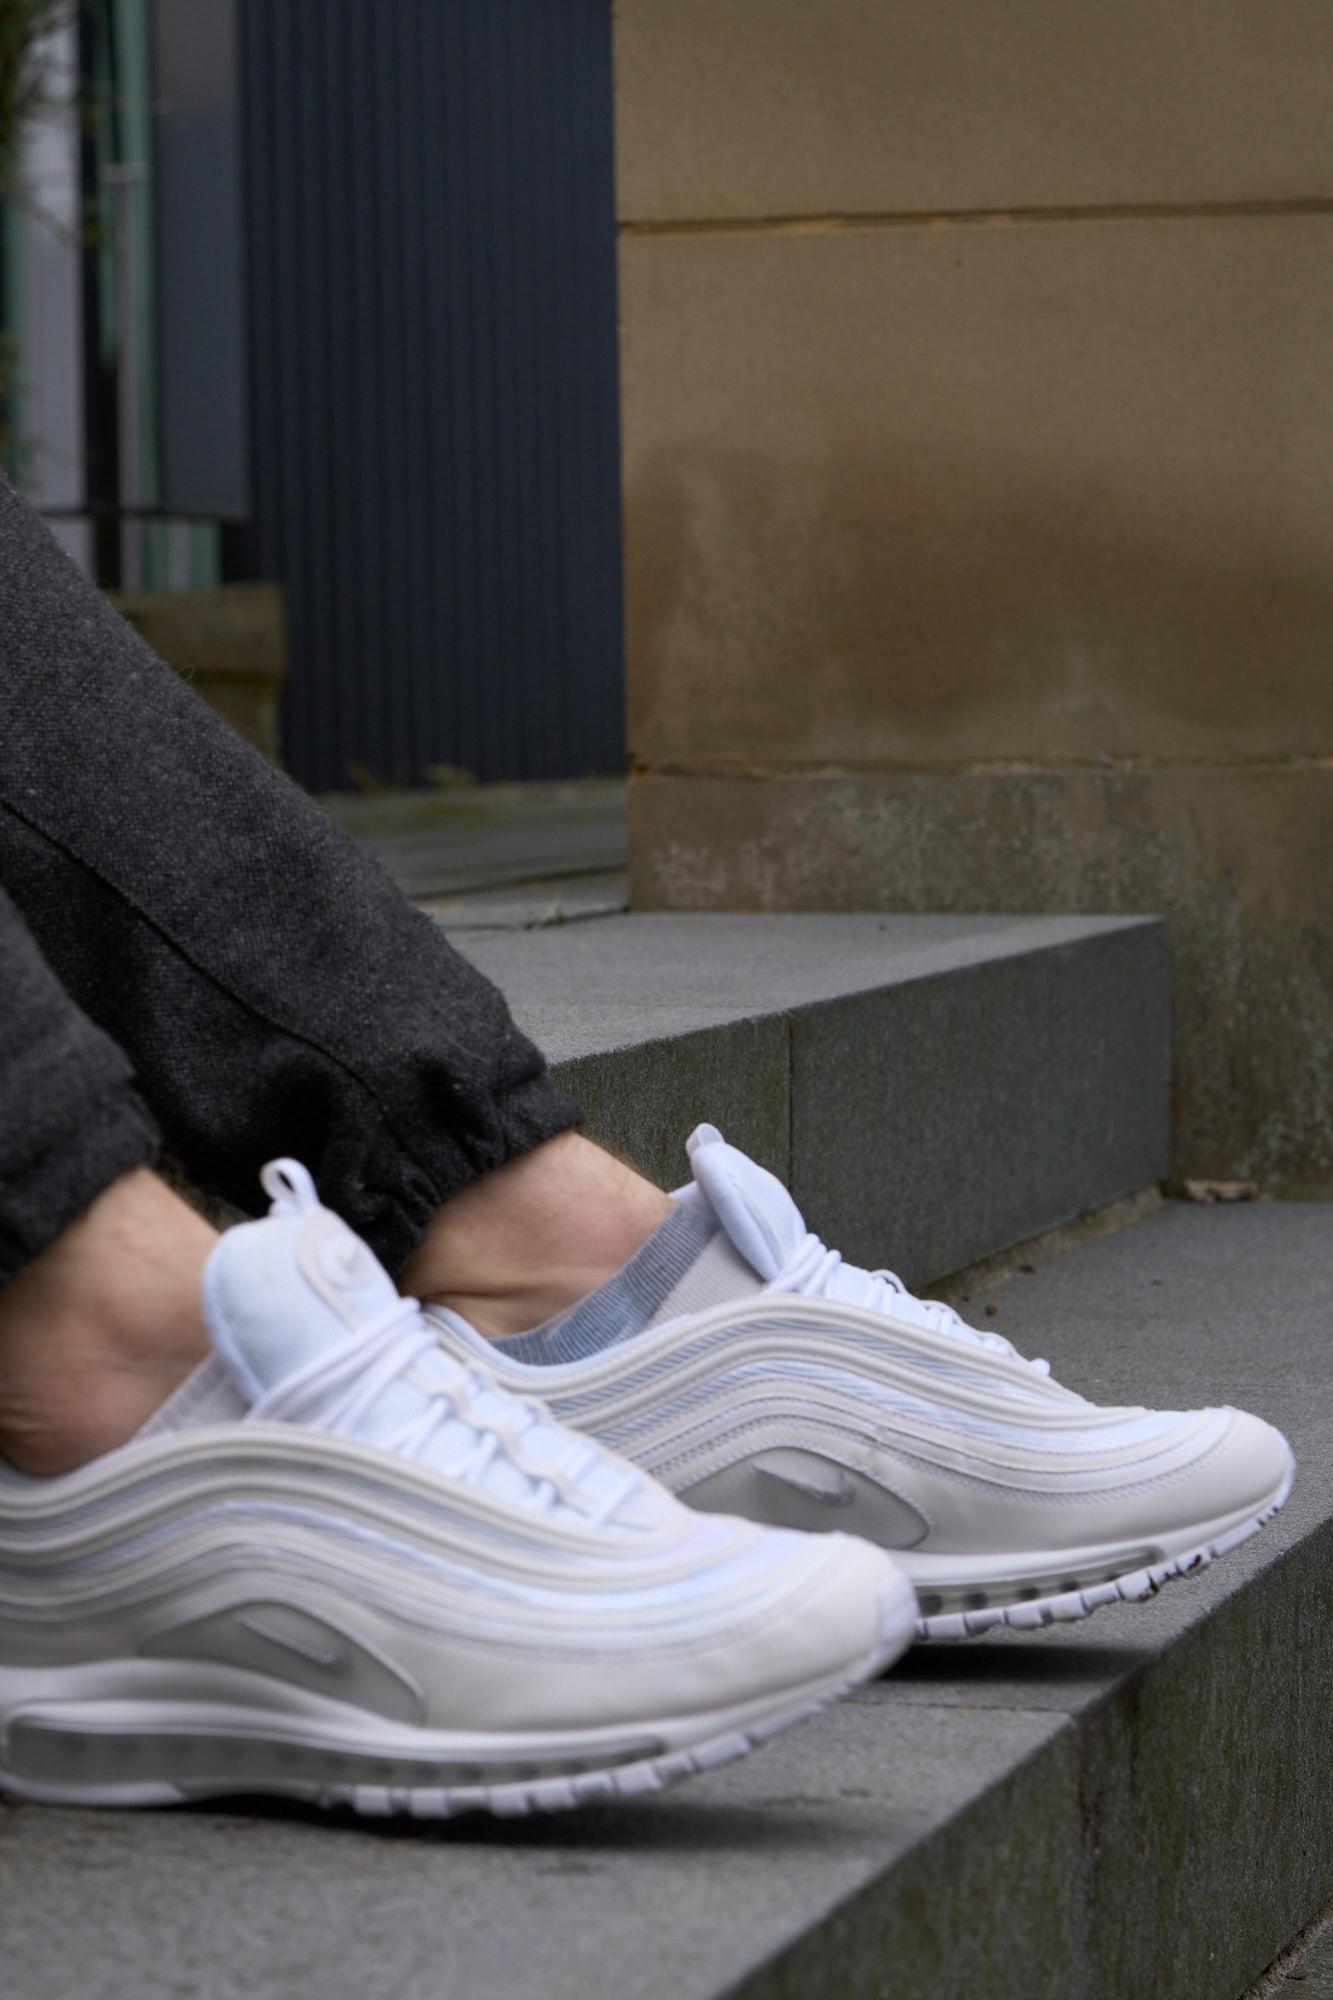 How Does The Nike Air Max 97 Fit And Is It True To Size?